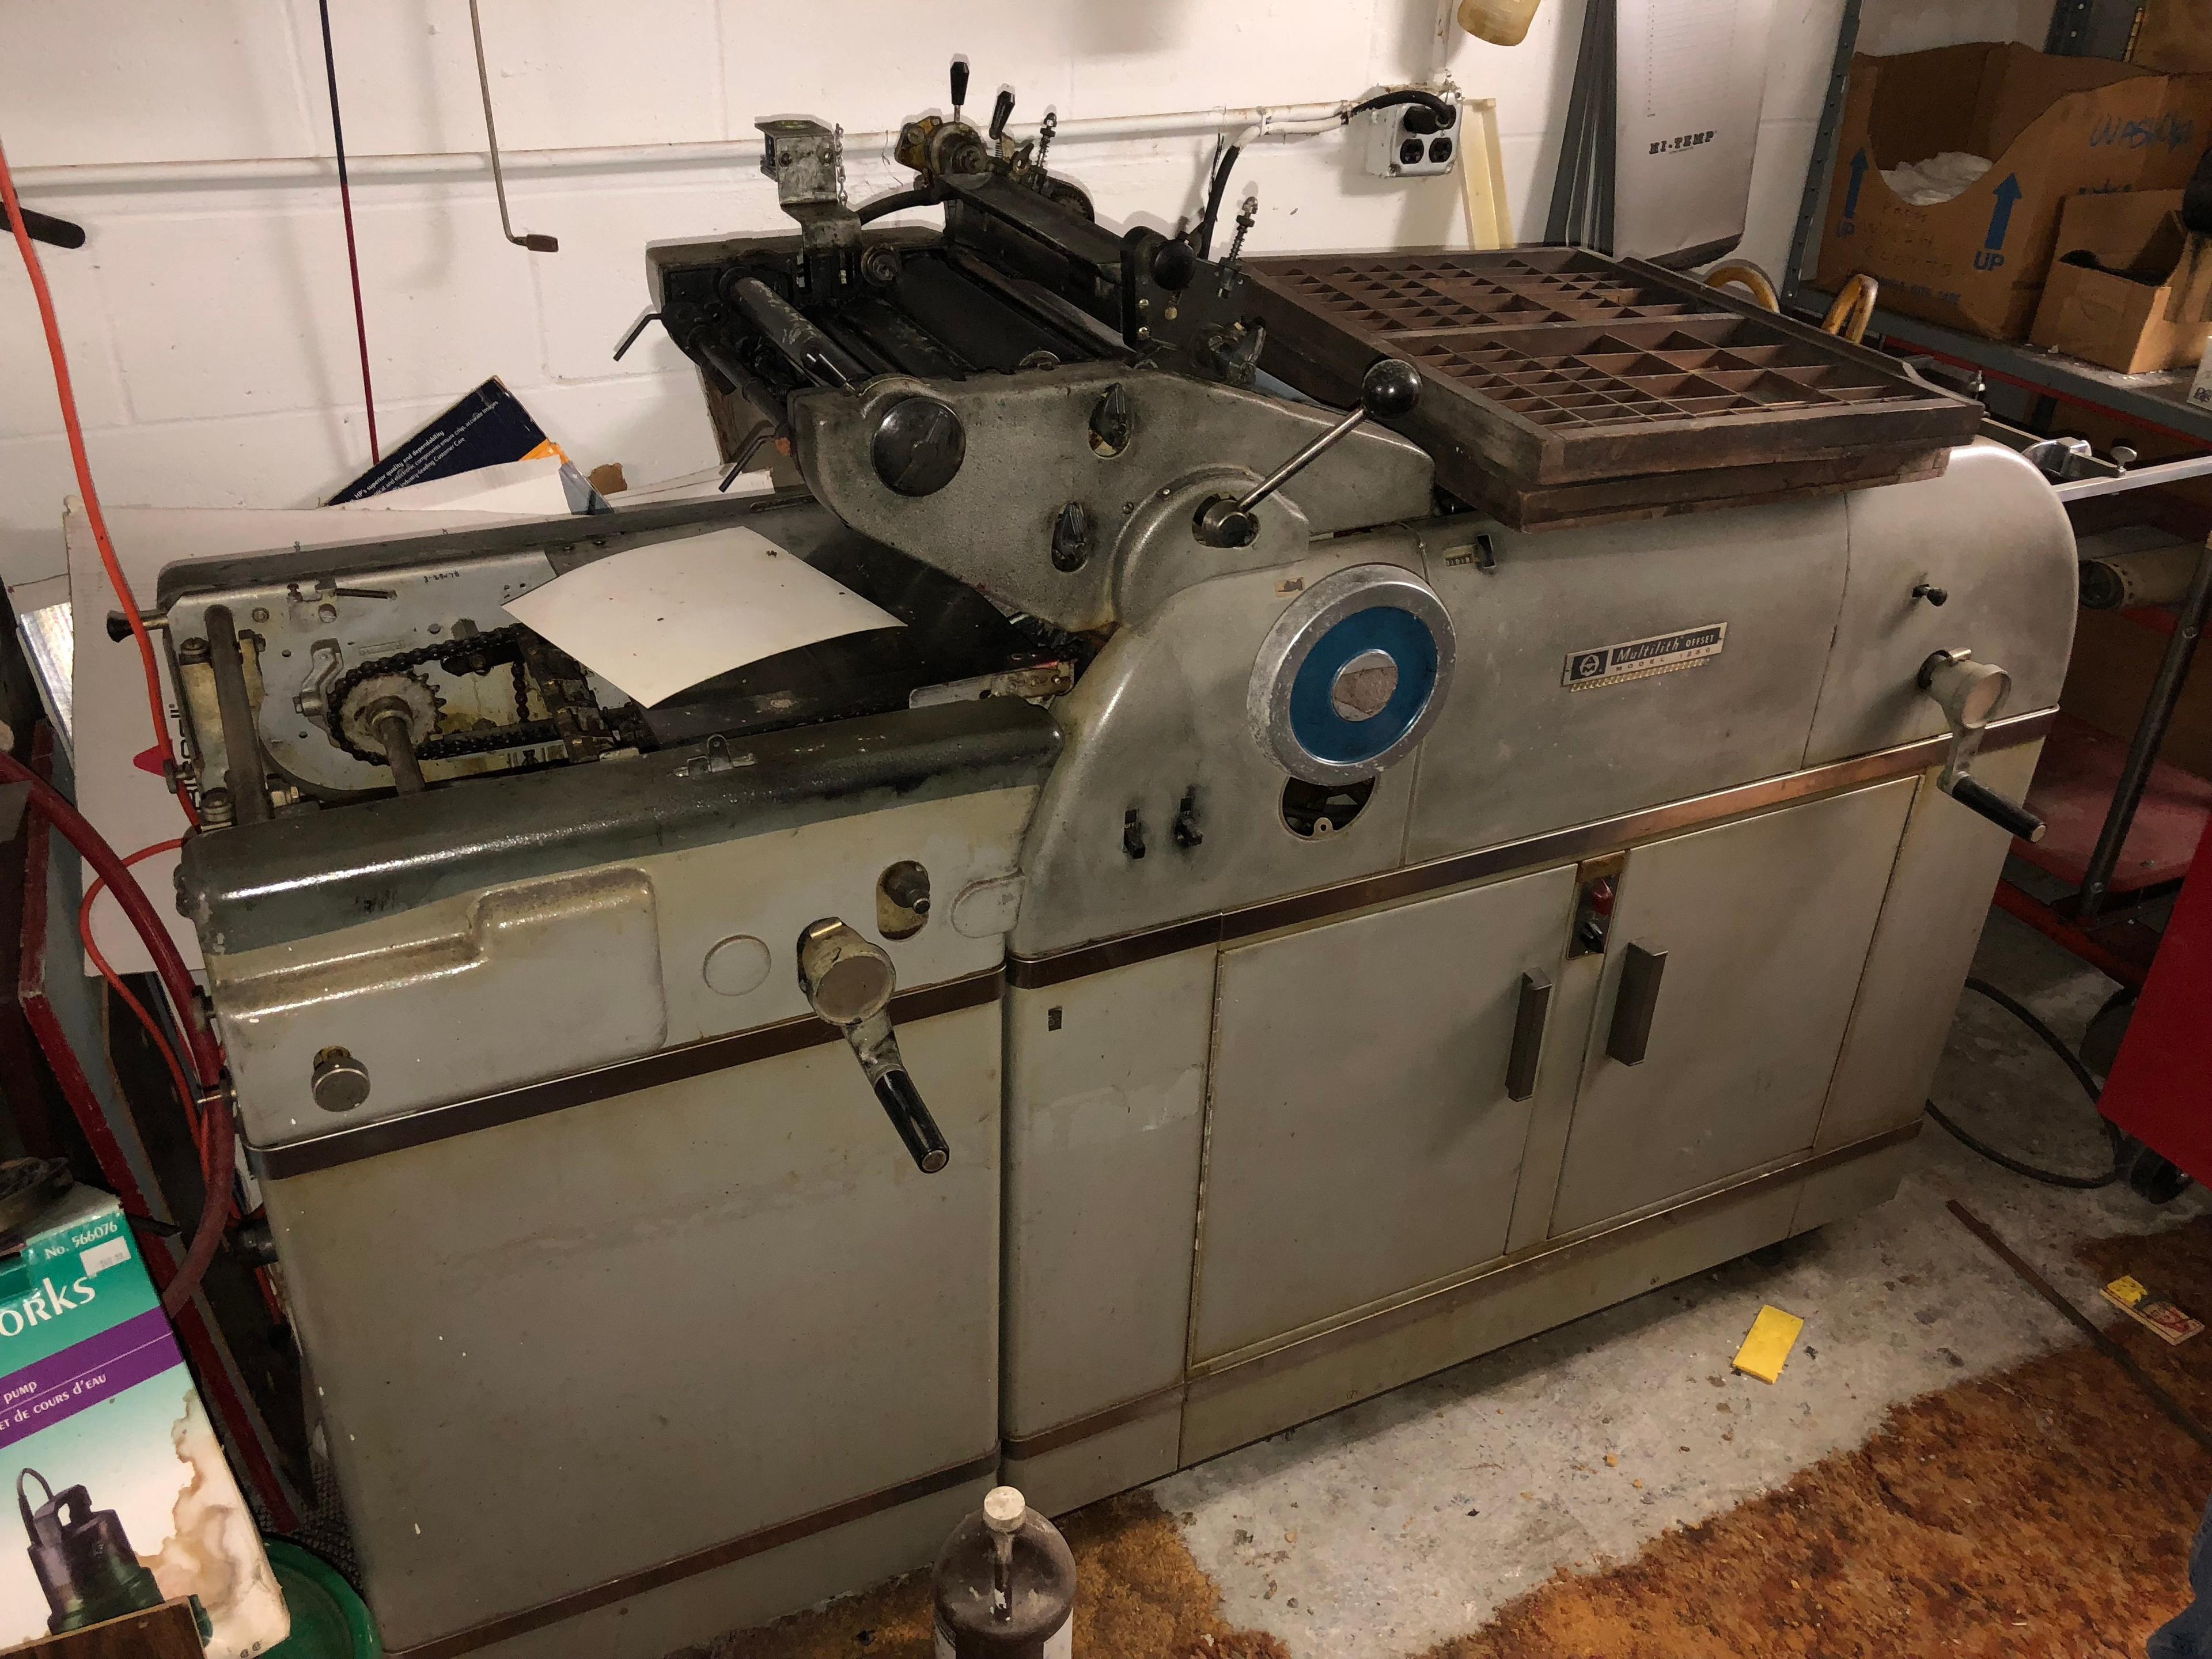 AM Multilith Offset Model 1250 Offset Printing Press - Buyer Responsible for Removal